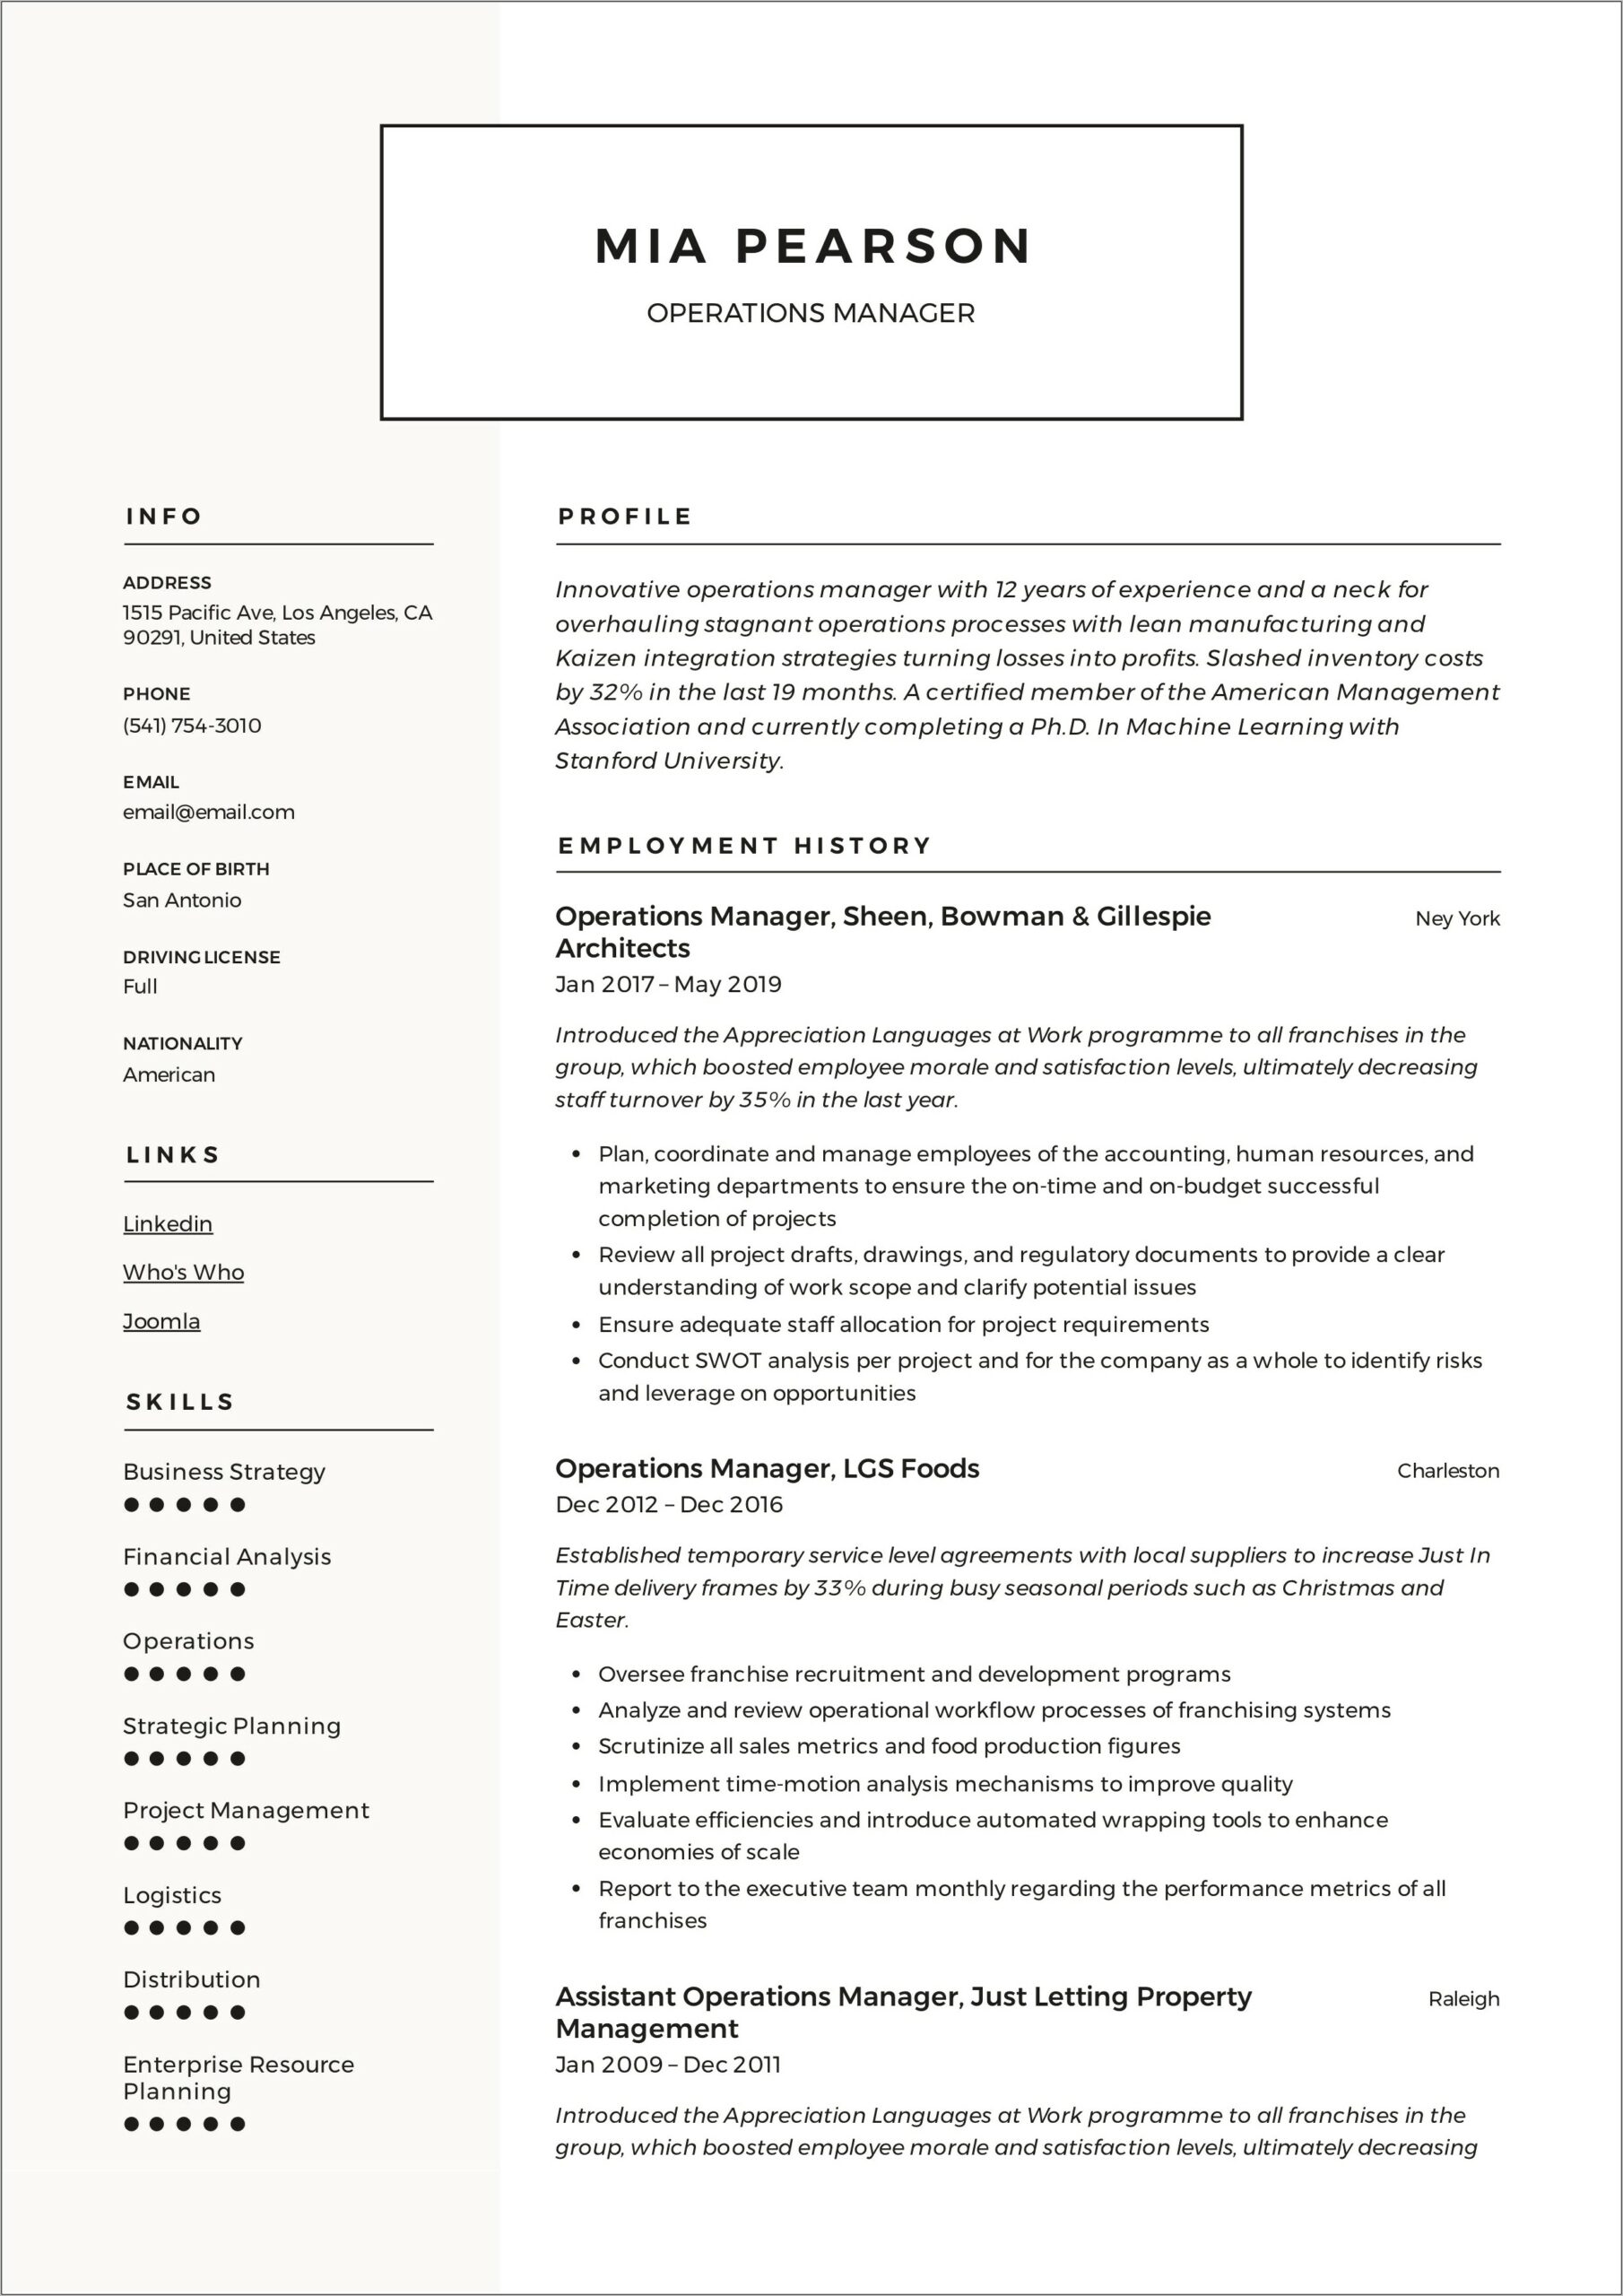 Operations Manager Skills For Resume